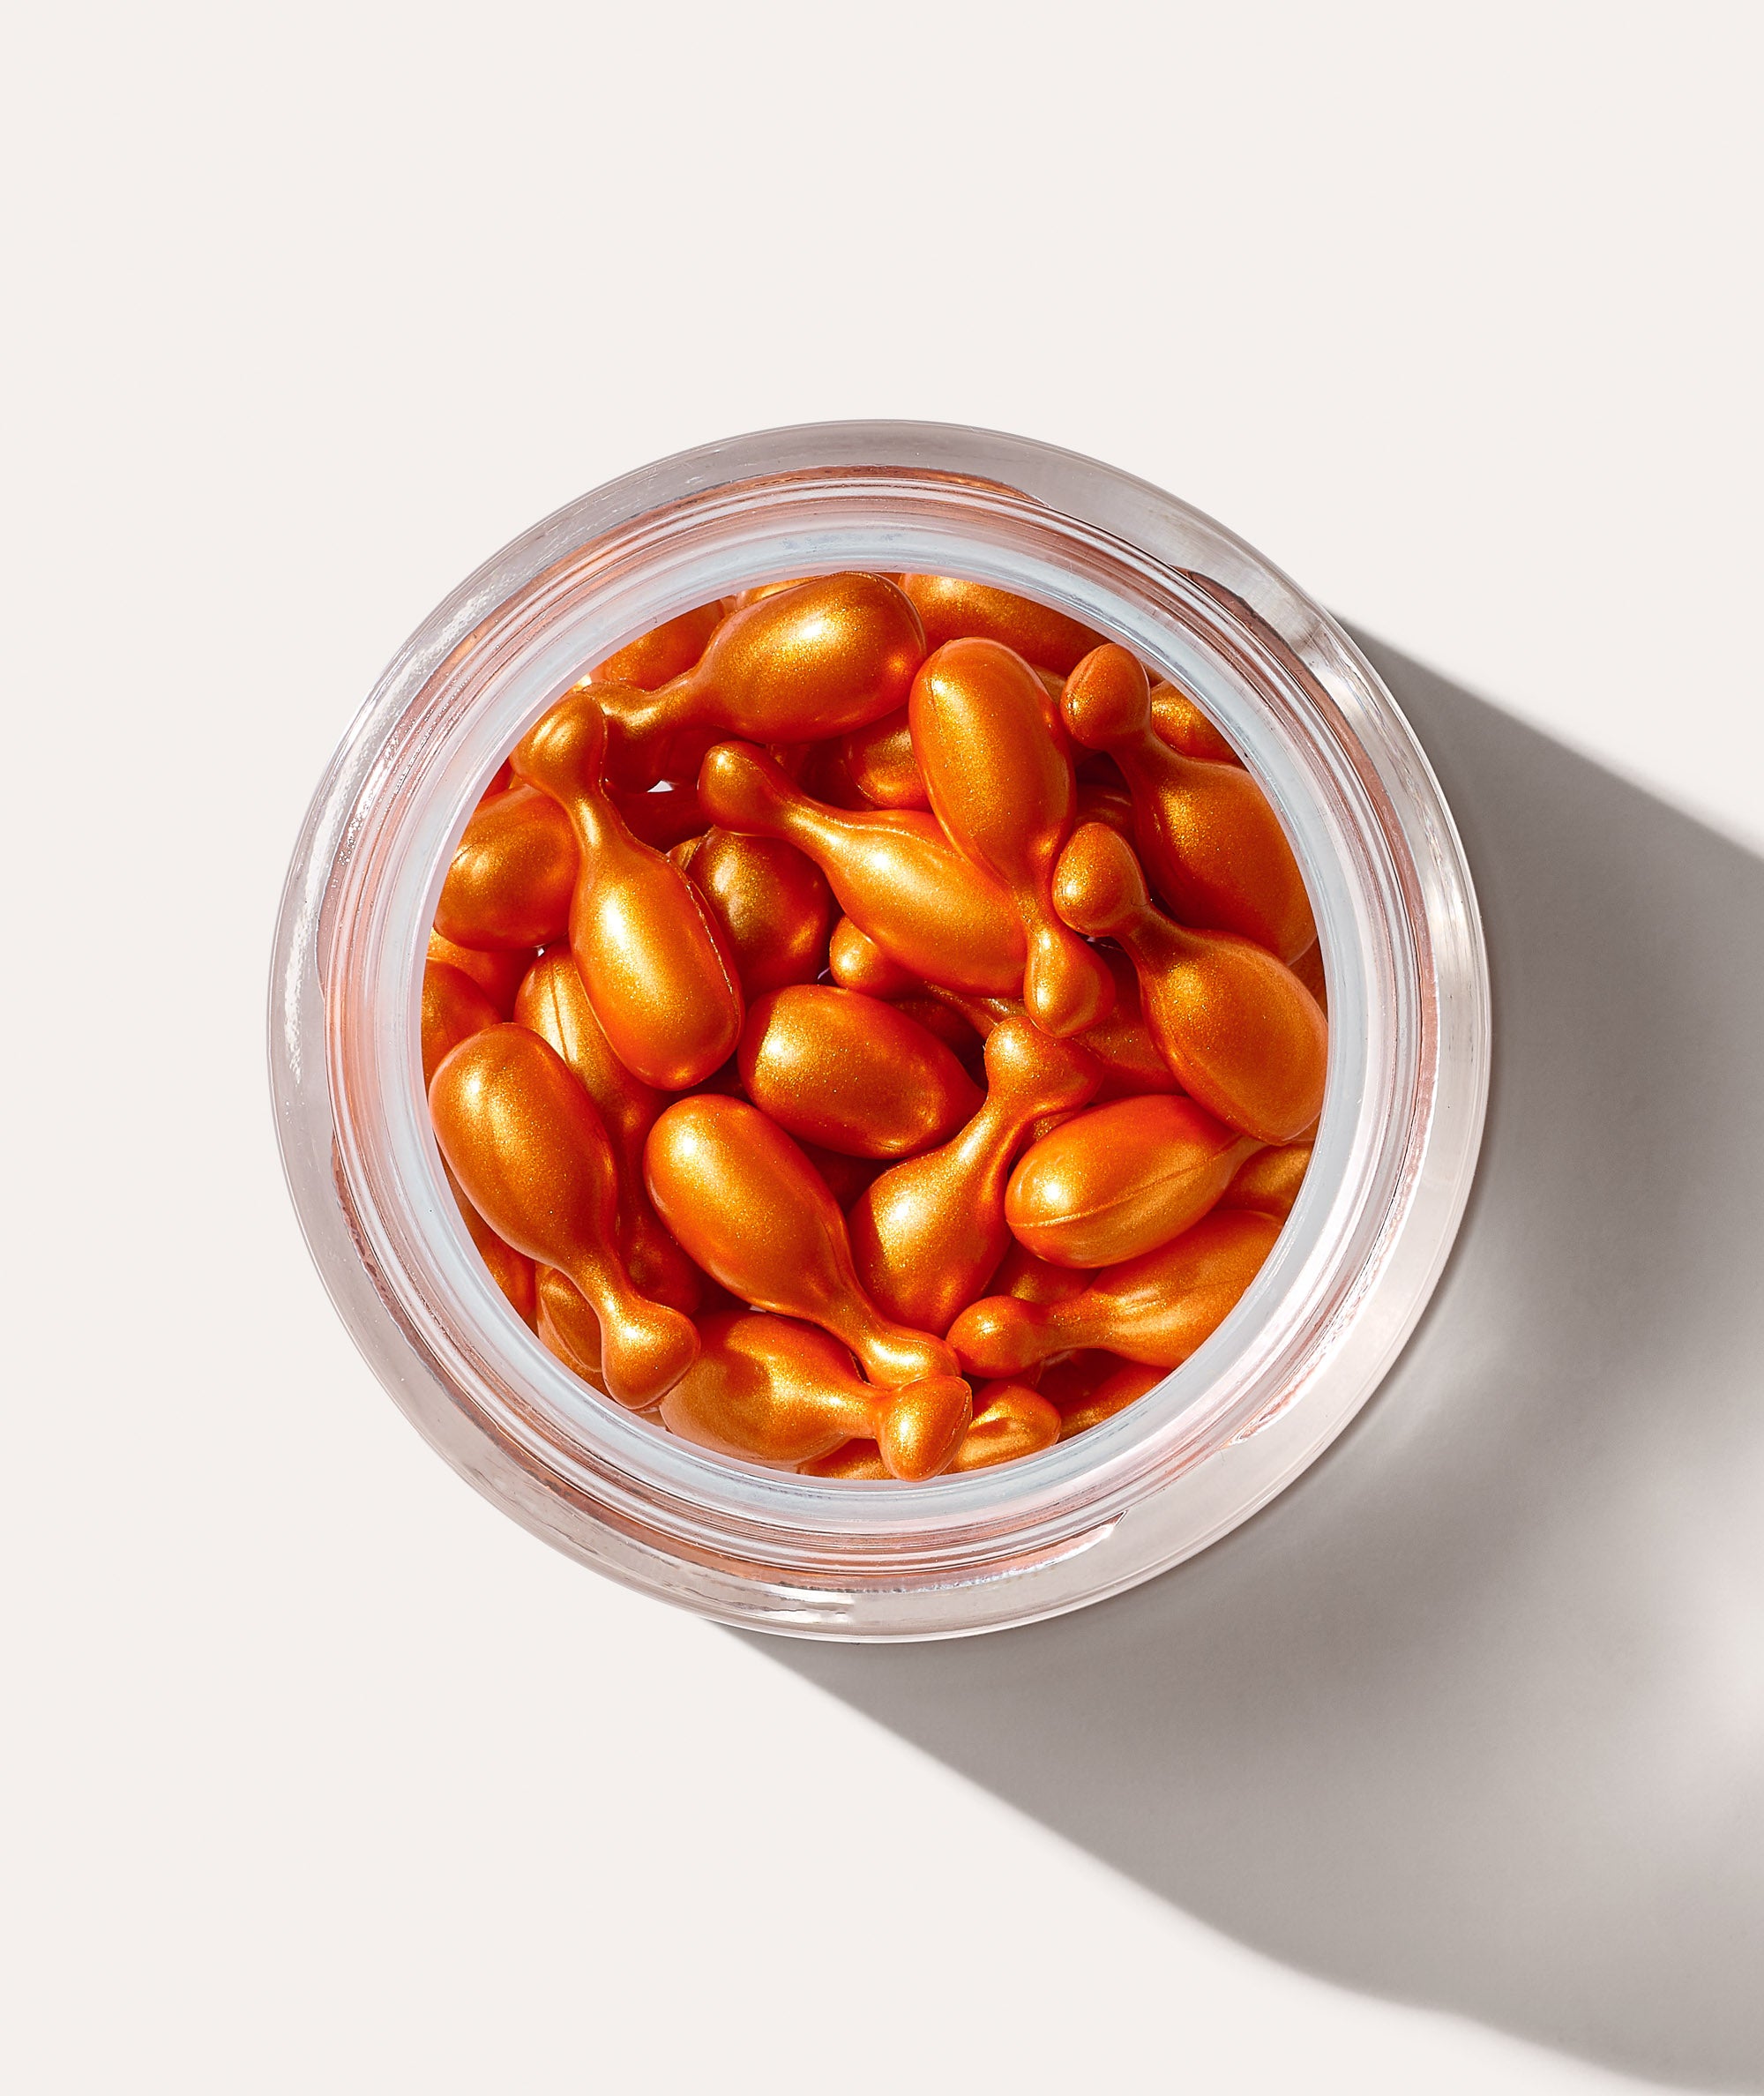 This is a picture of the Borghese Power-C Firming & Brightening Serum Capsules in a glass jar opened